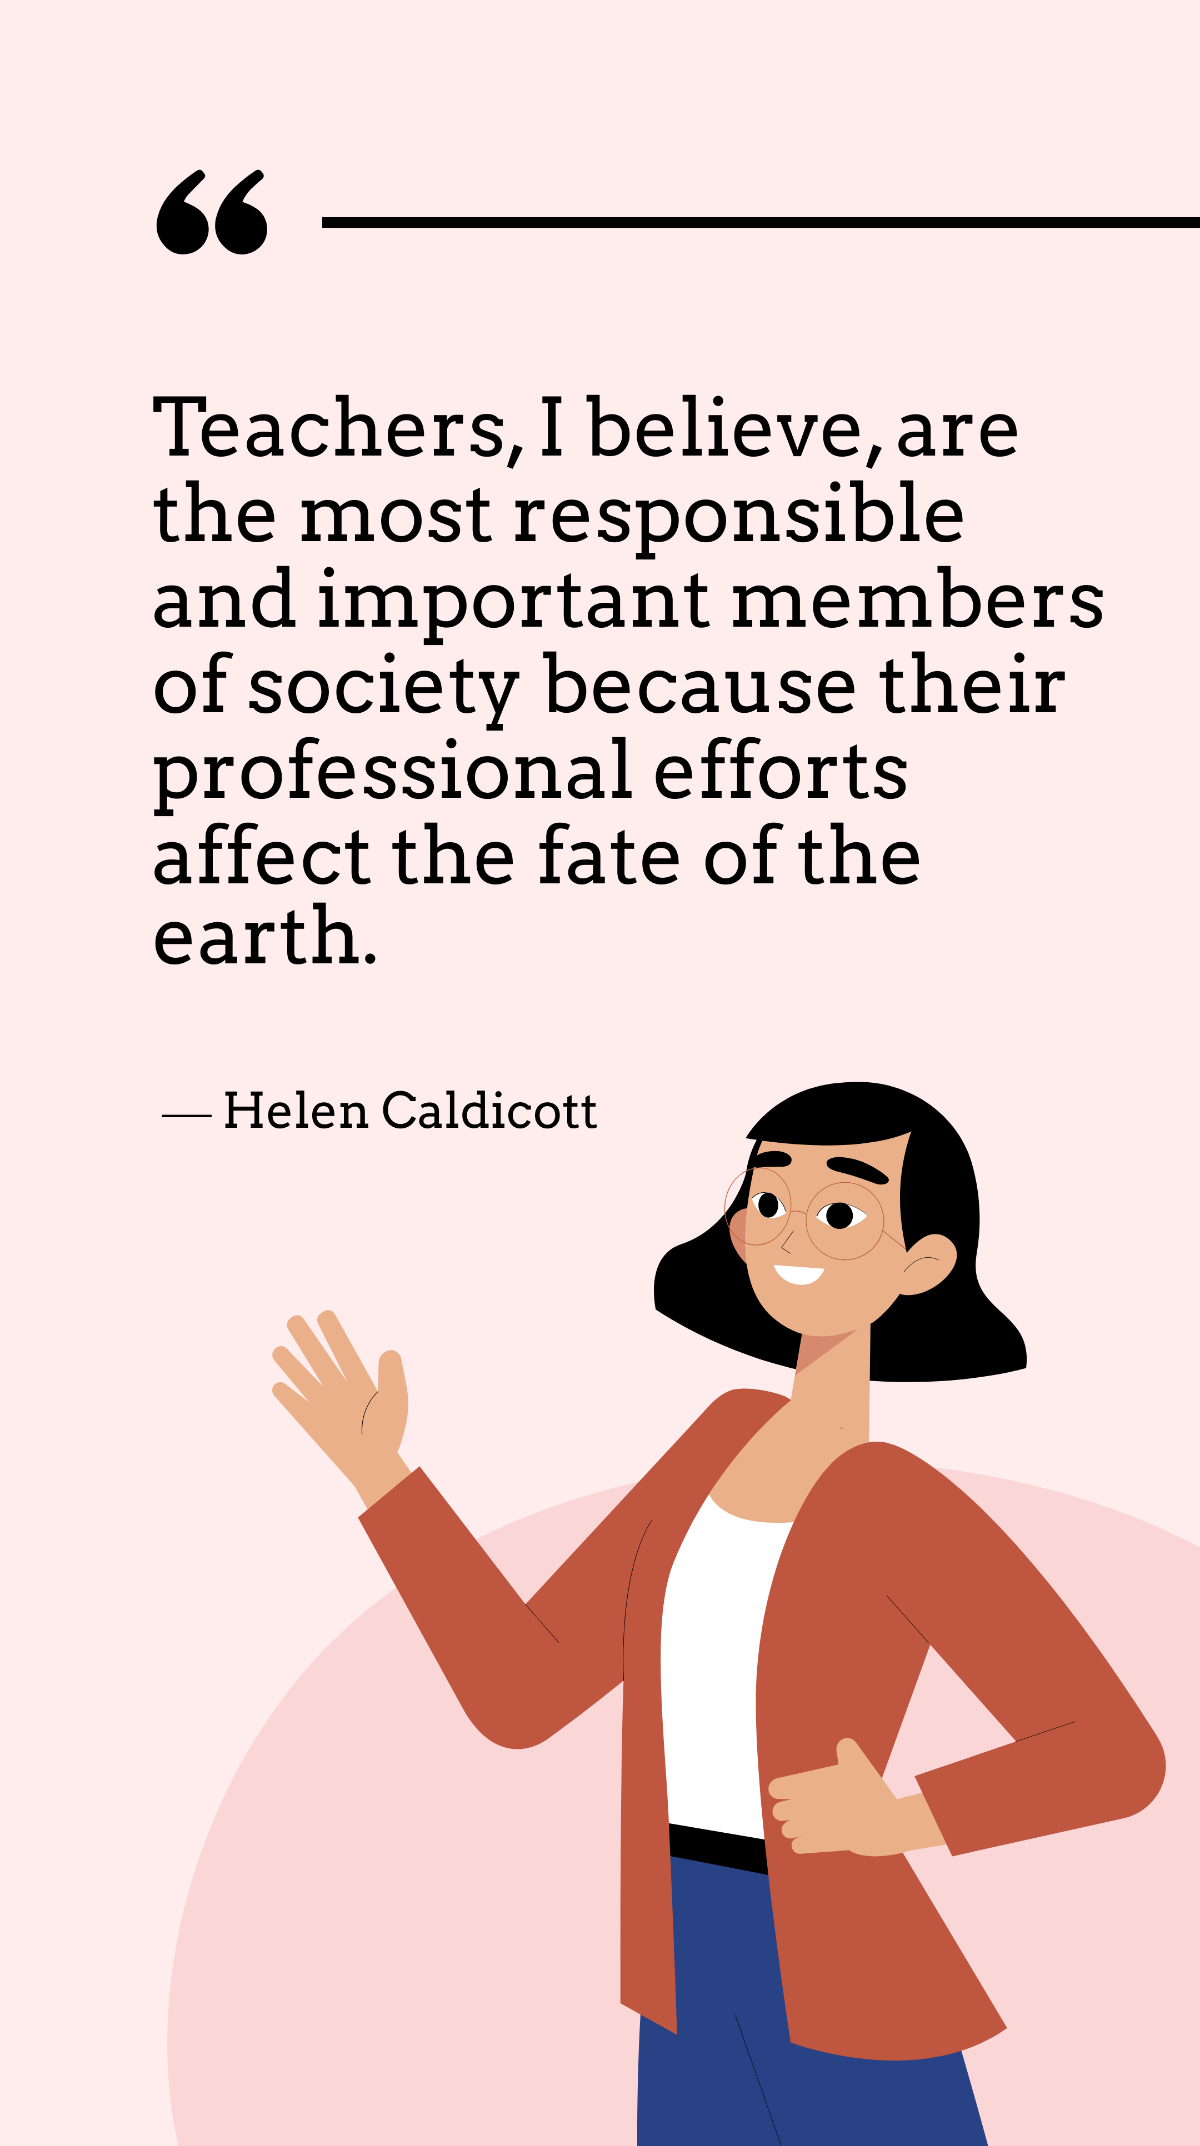 Helen Caldicott - Teachers, I believe, are the most responsible and important members of society because their professional efforts affect the fate of the earth.